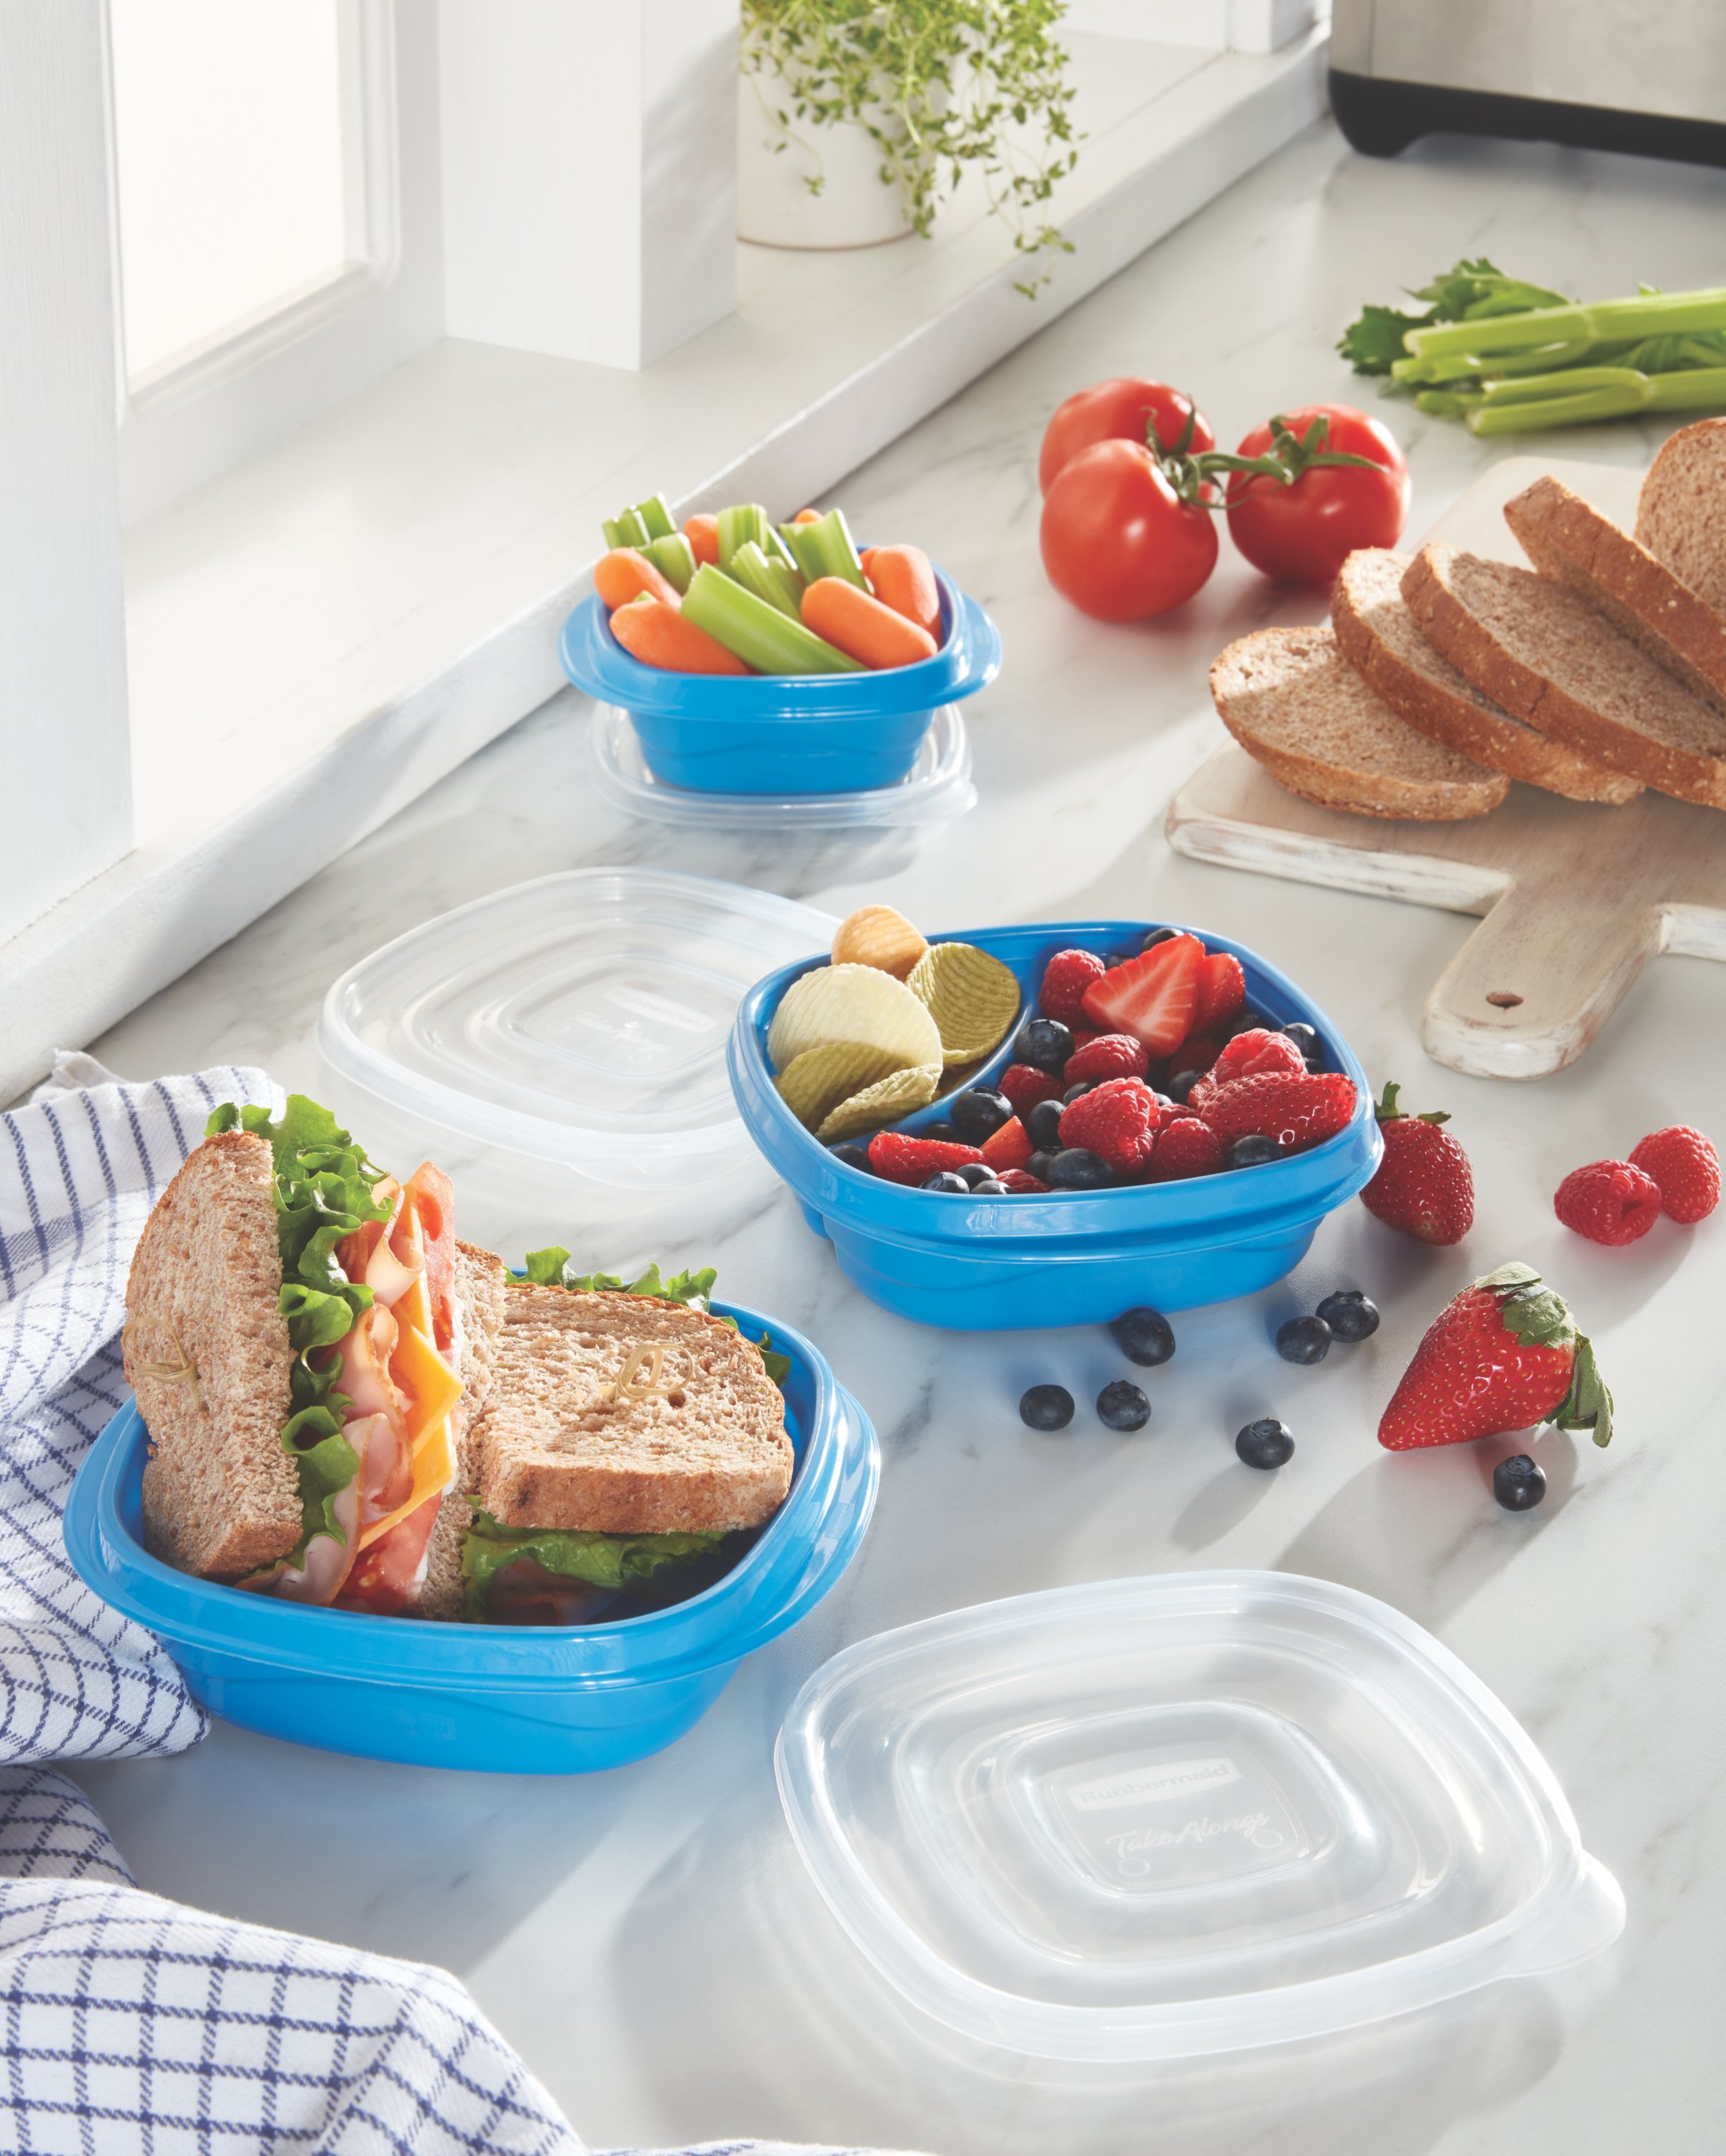 Rubbermaid TakeAlongs 2.9-Cup Square Food Storage Containers, 4-Pack 